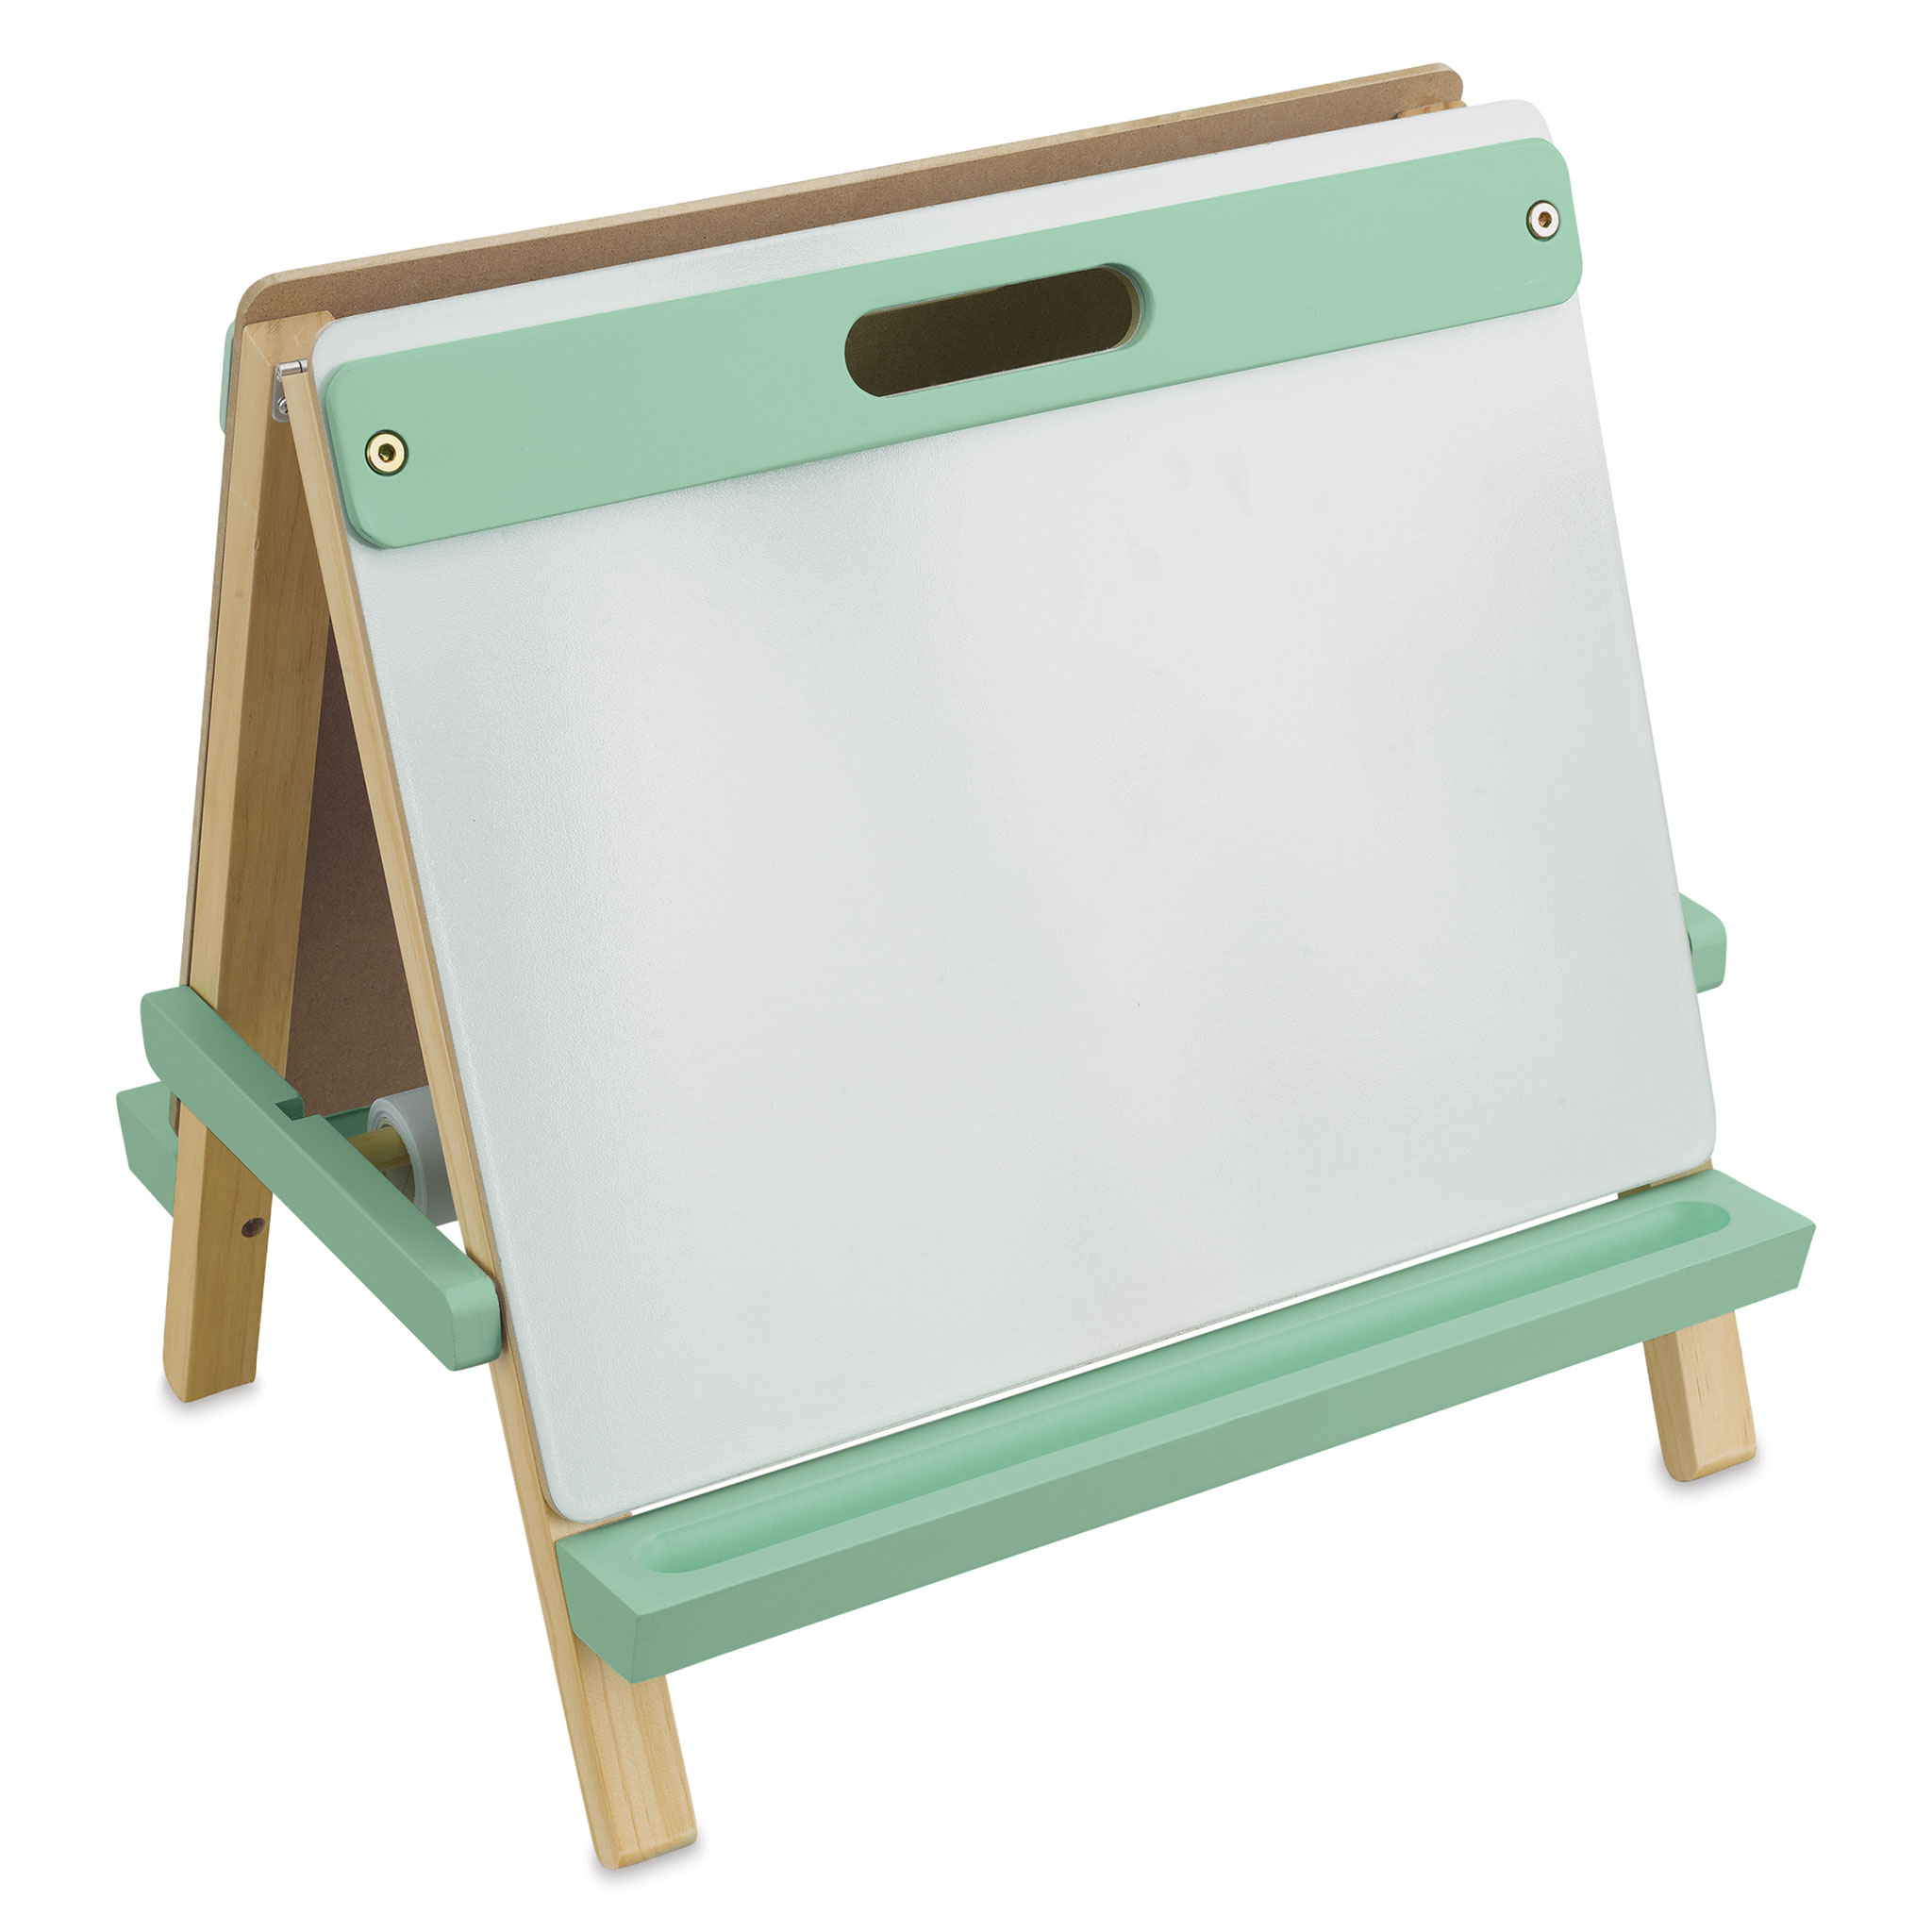 CHILDREN'S TABLE TOP EASEL - 082435133003